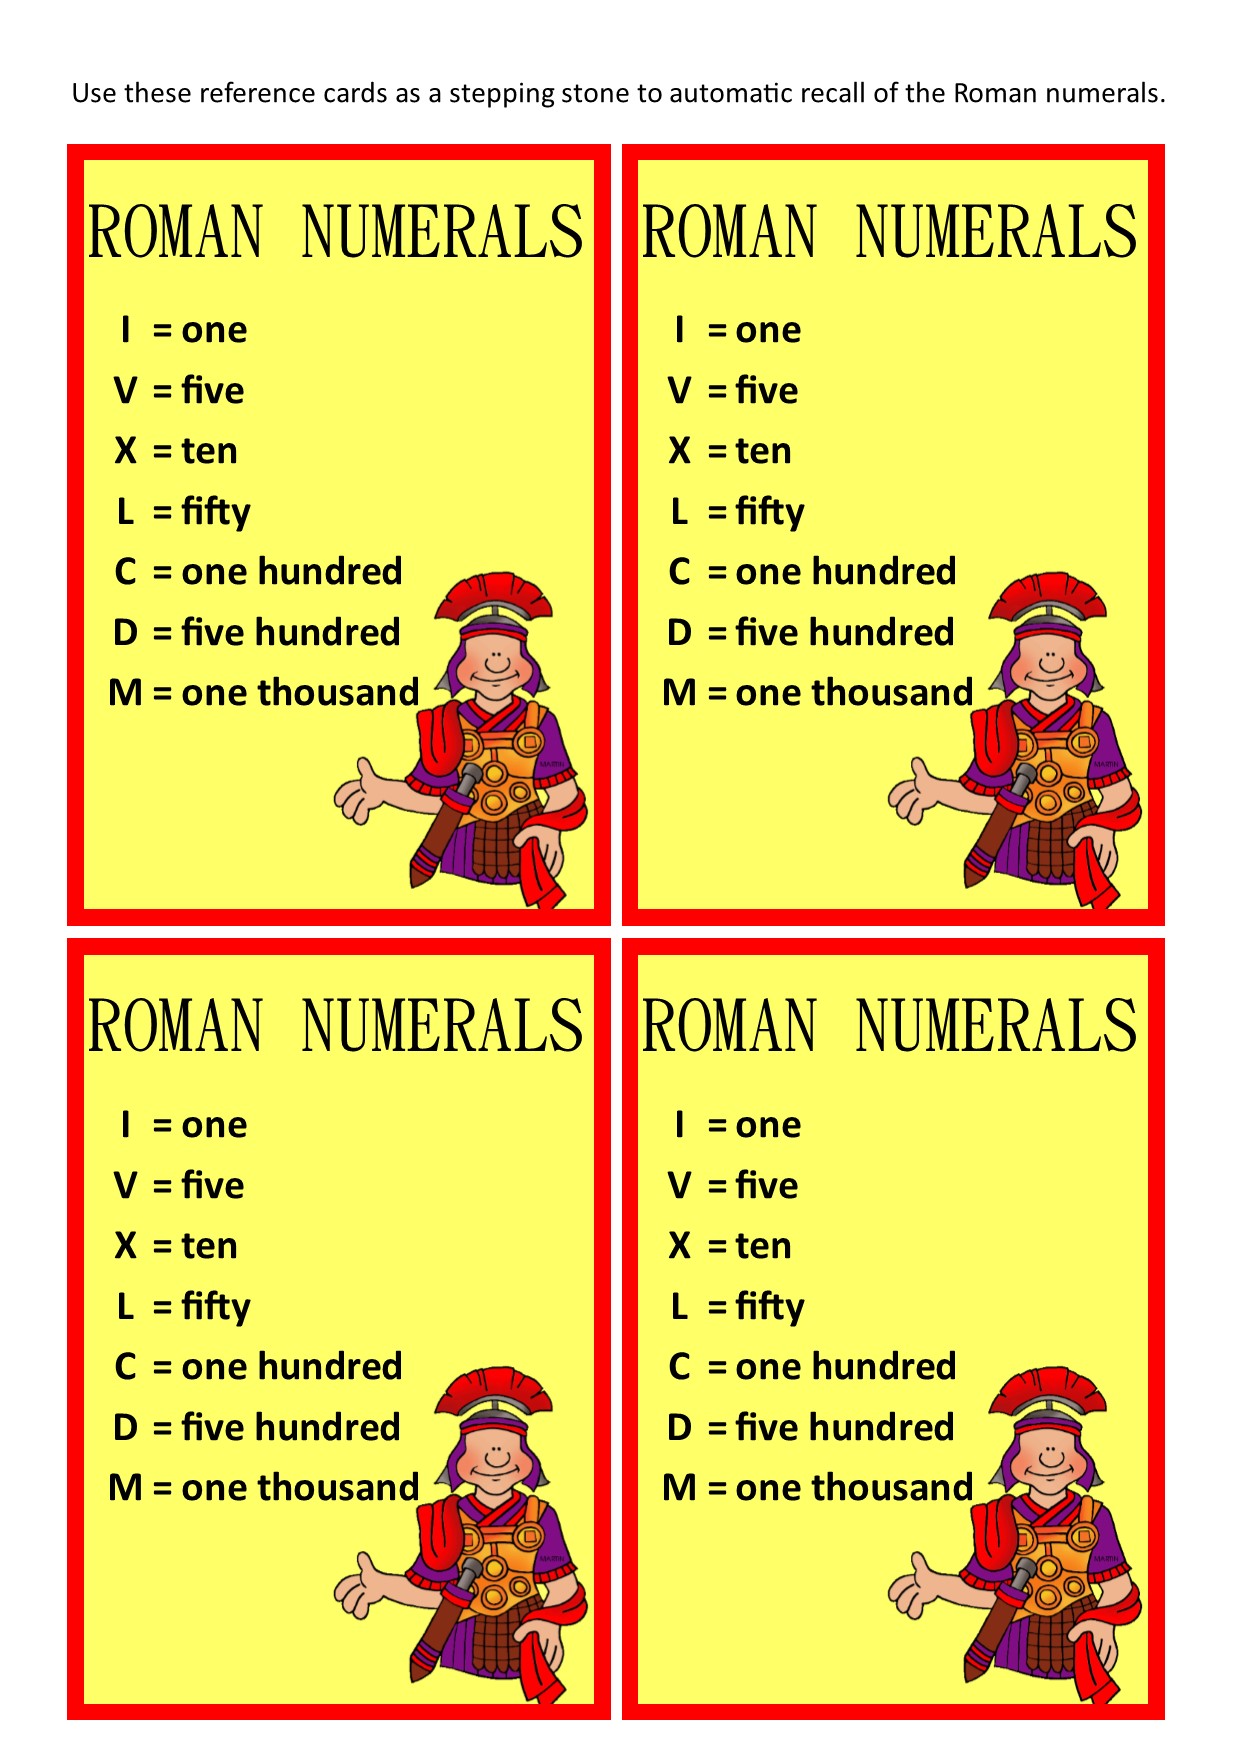 Roman Numeral Reference Cards